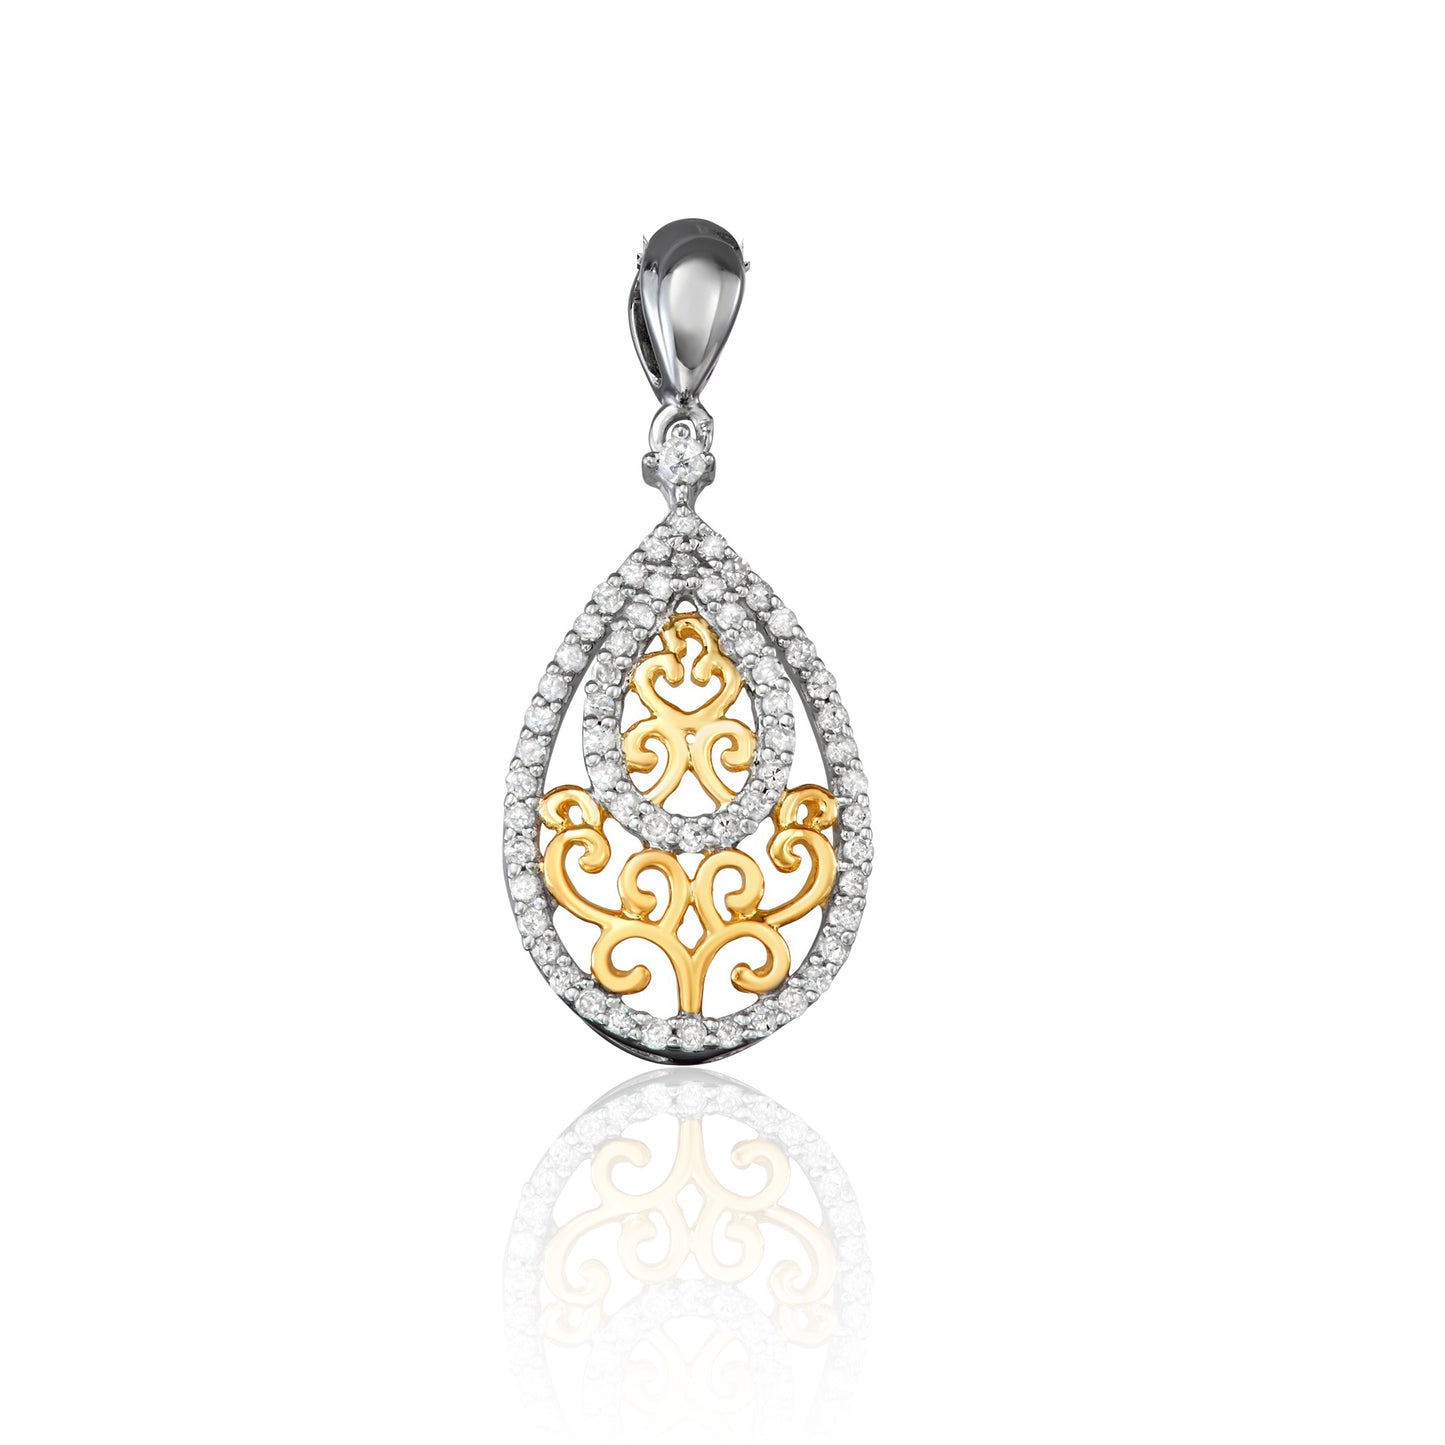 Two-Tone Sterling Silver 0.25 ct TDW White Diamond Tear-drop Necklace